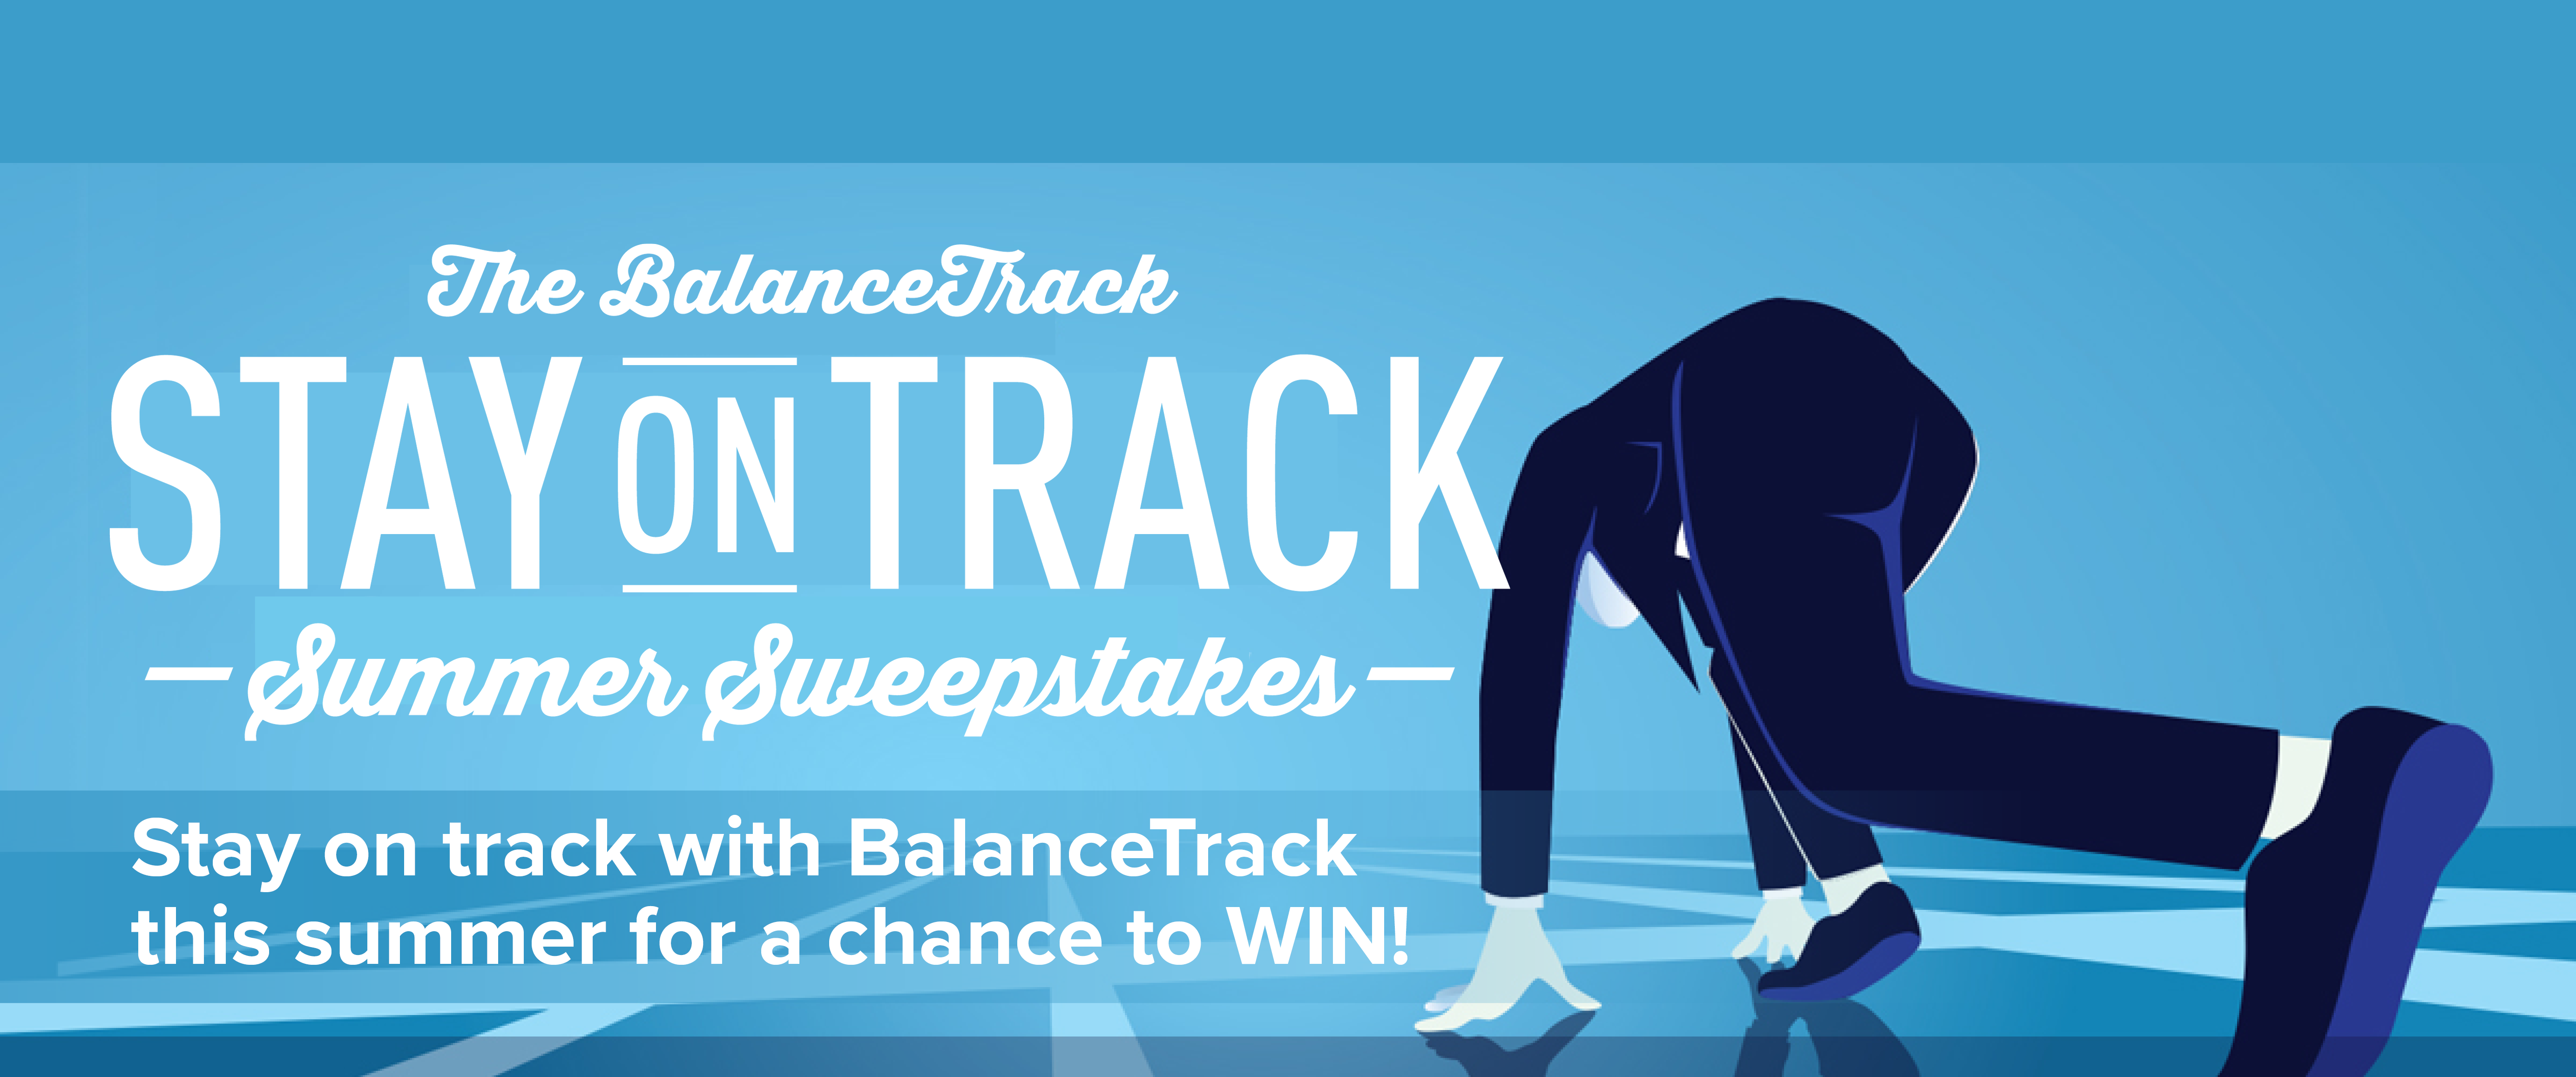 The BalanceTrack Stay on Track summer contest Stay on track with BalanceTrack this summer for a chance to WIN!